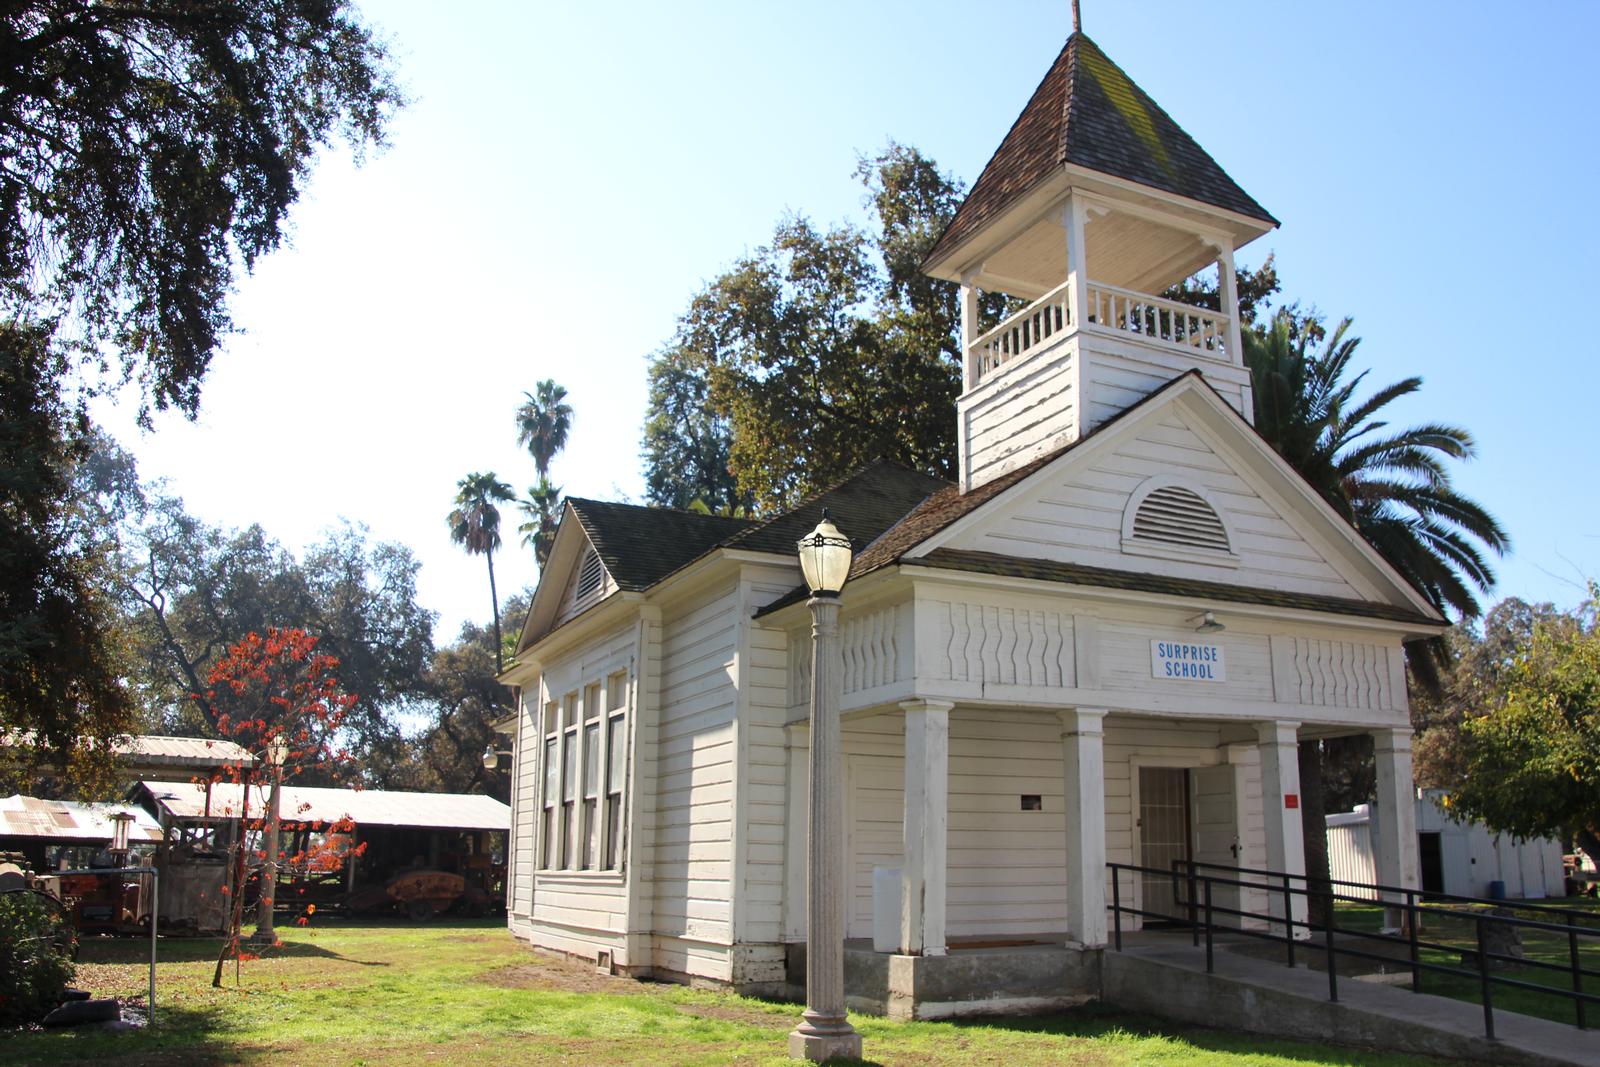 The Pioneer Village area contains this restored school house from the 19th century